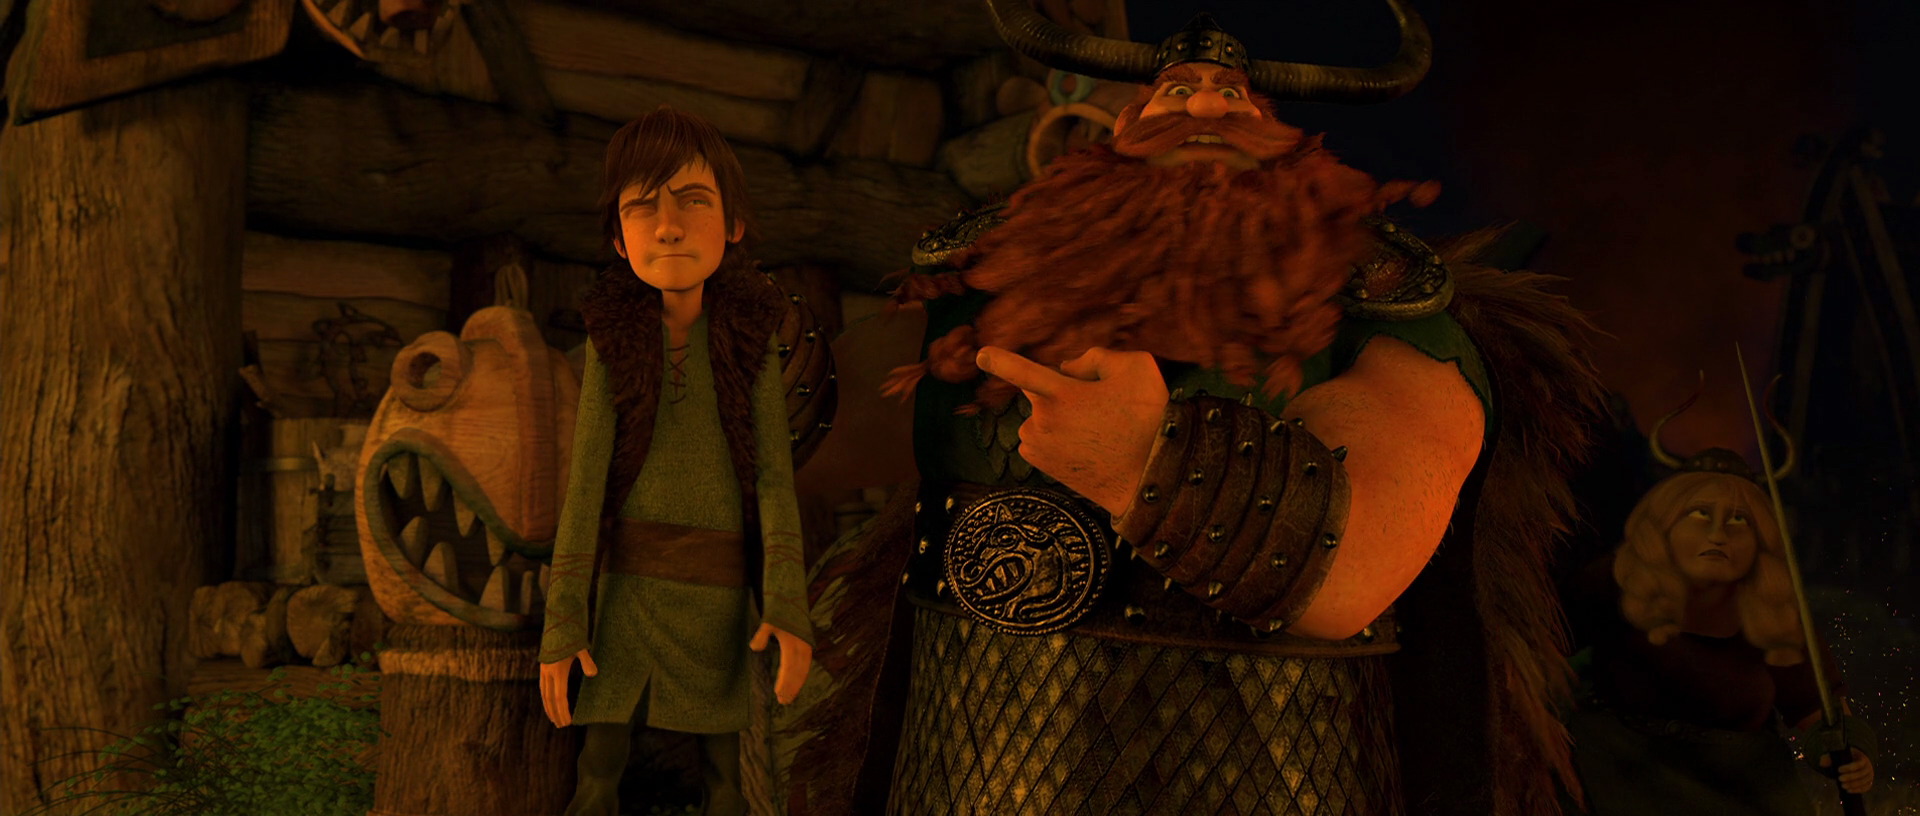 During a nighttime dragon battle, Stoick points to Hiccup and tells him to get back inside.